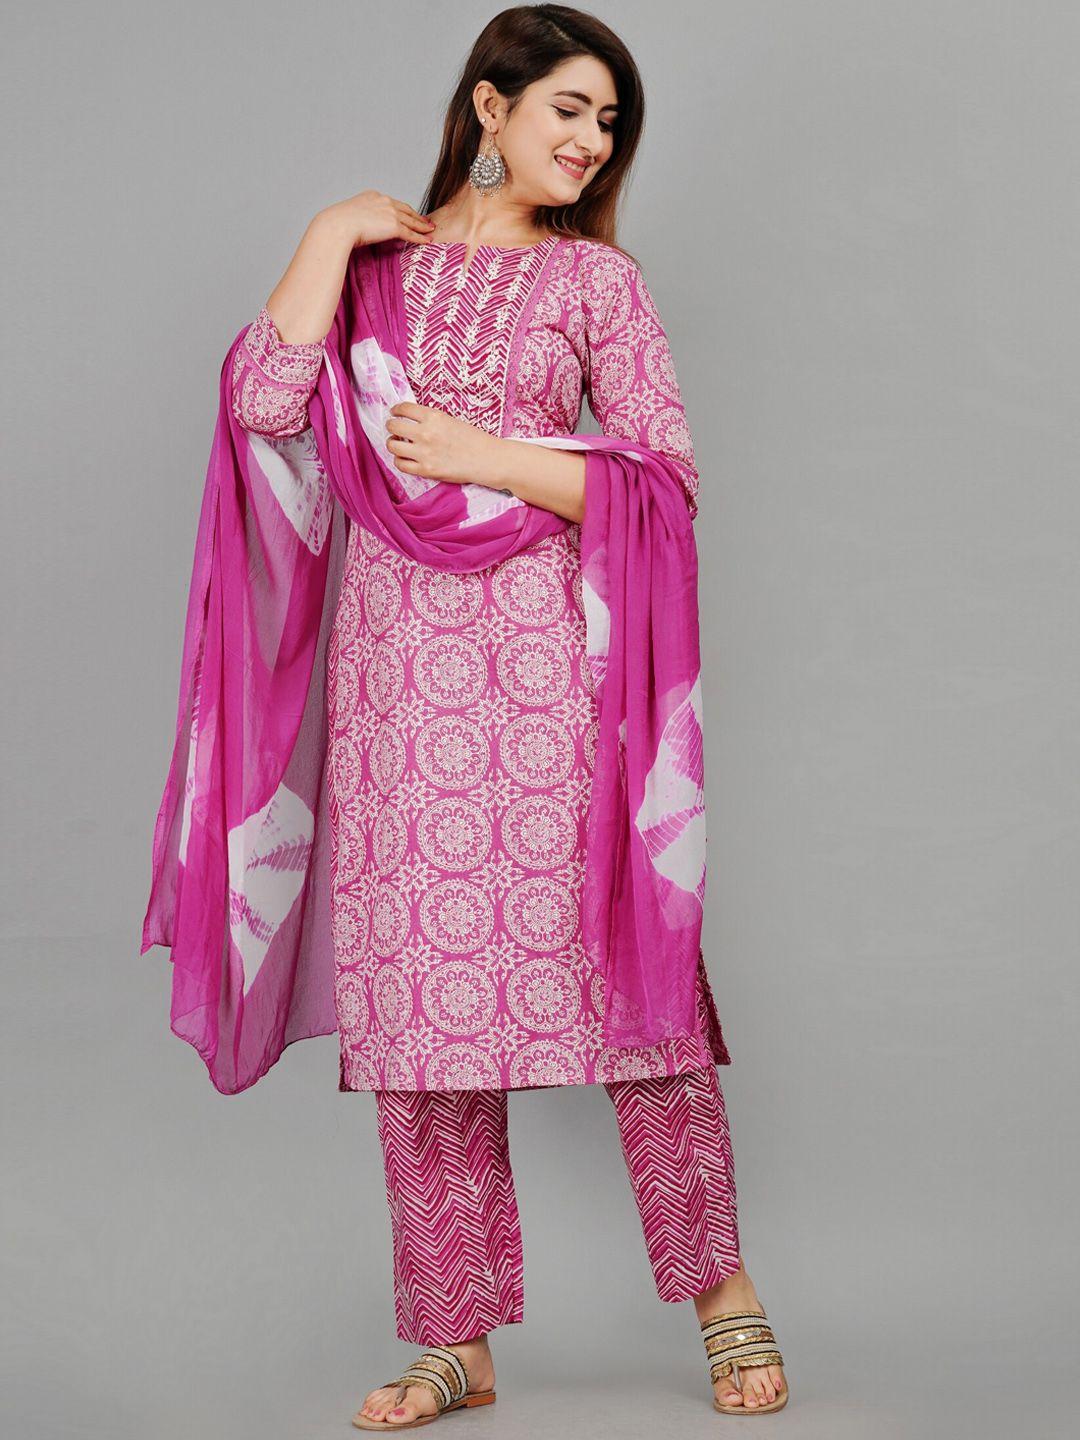 etnicawear women printed pure cotton kurta with trouser and dupatta